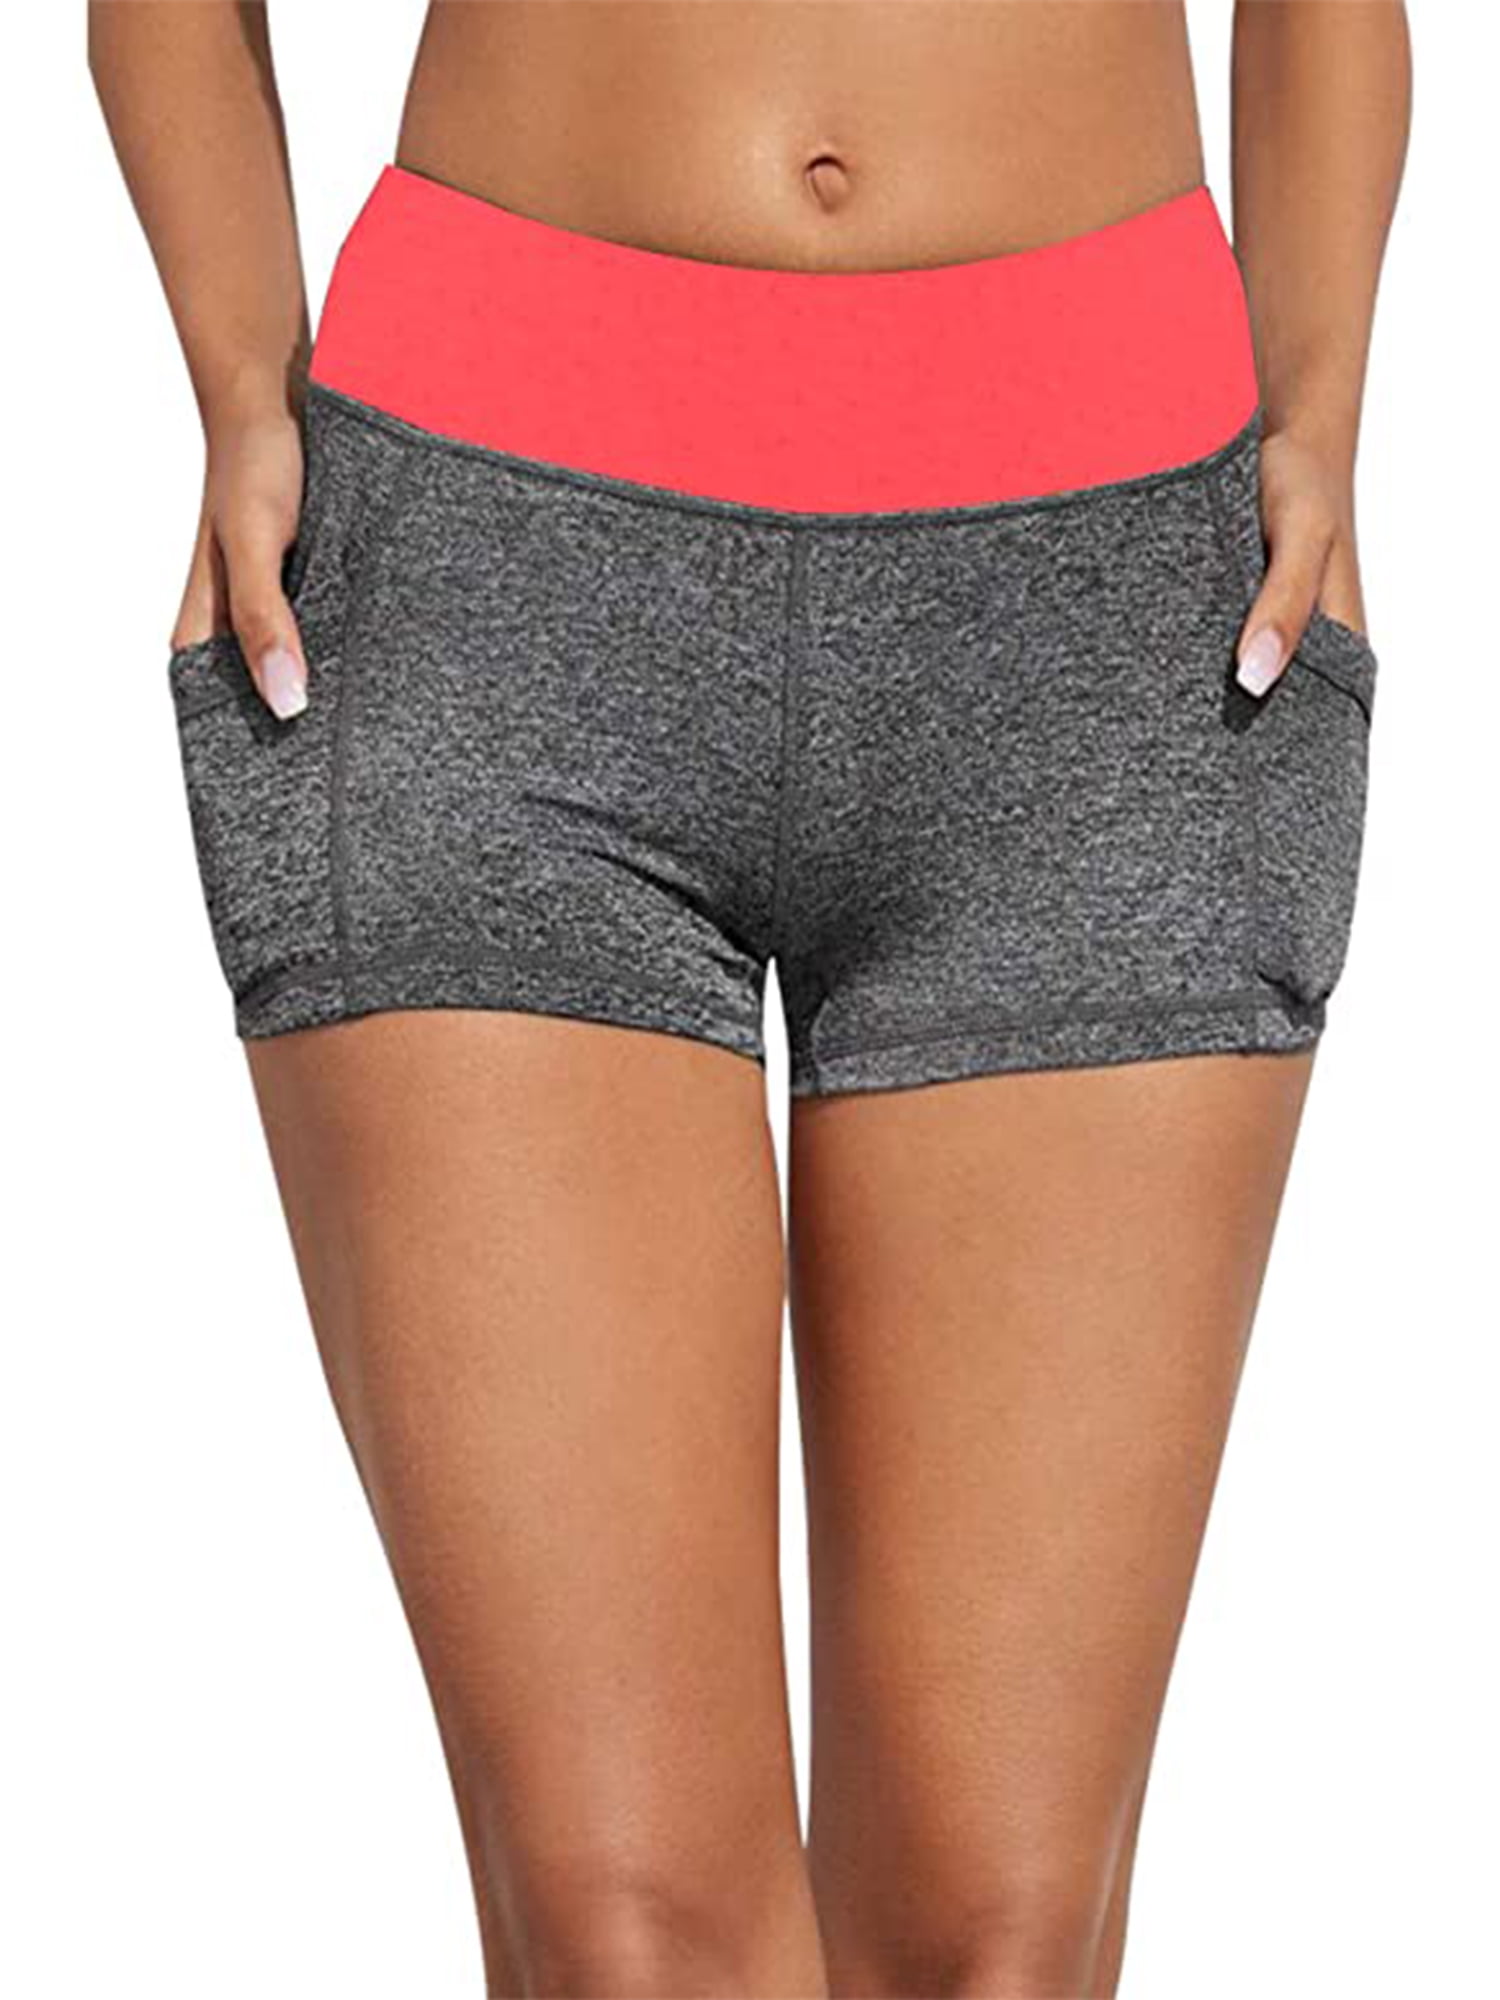 6 Day Workout shorts for thick thighs for Burn Fat fast